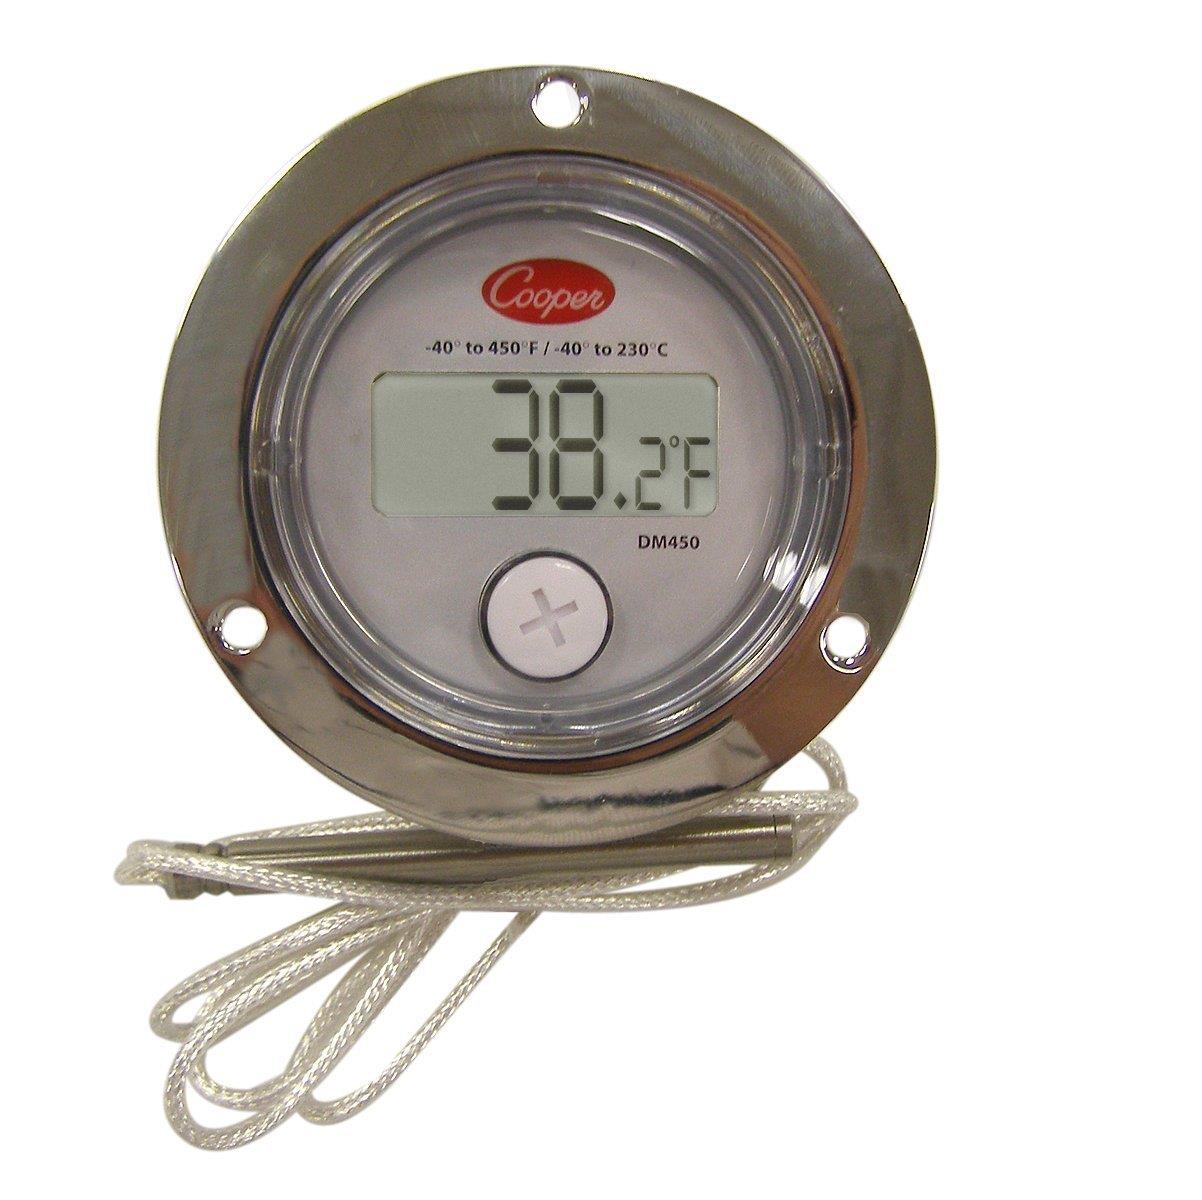 Bulk Digital Panel Thermometer 2 Front Flange -40/450 F: Cooper Atkins  DM450-0-3 (22 Digital Panel Thermometers) - Myriad Greeyn Office Supplies -  Disabled Veteran Owned SDVOSB, AbilityOne Distributor